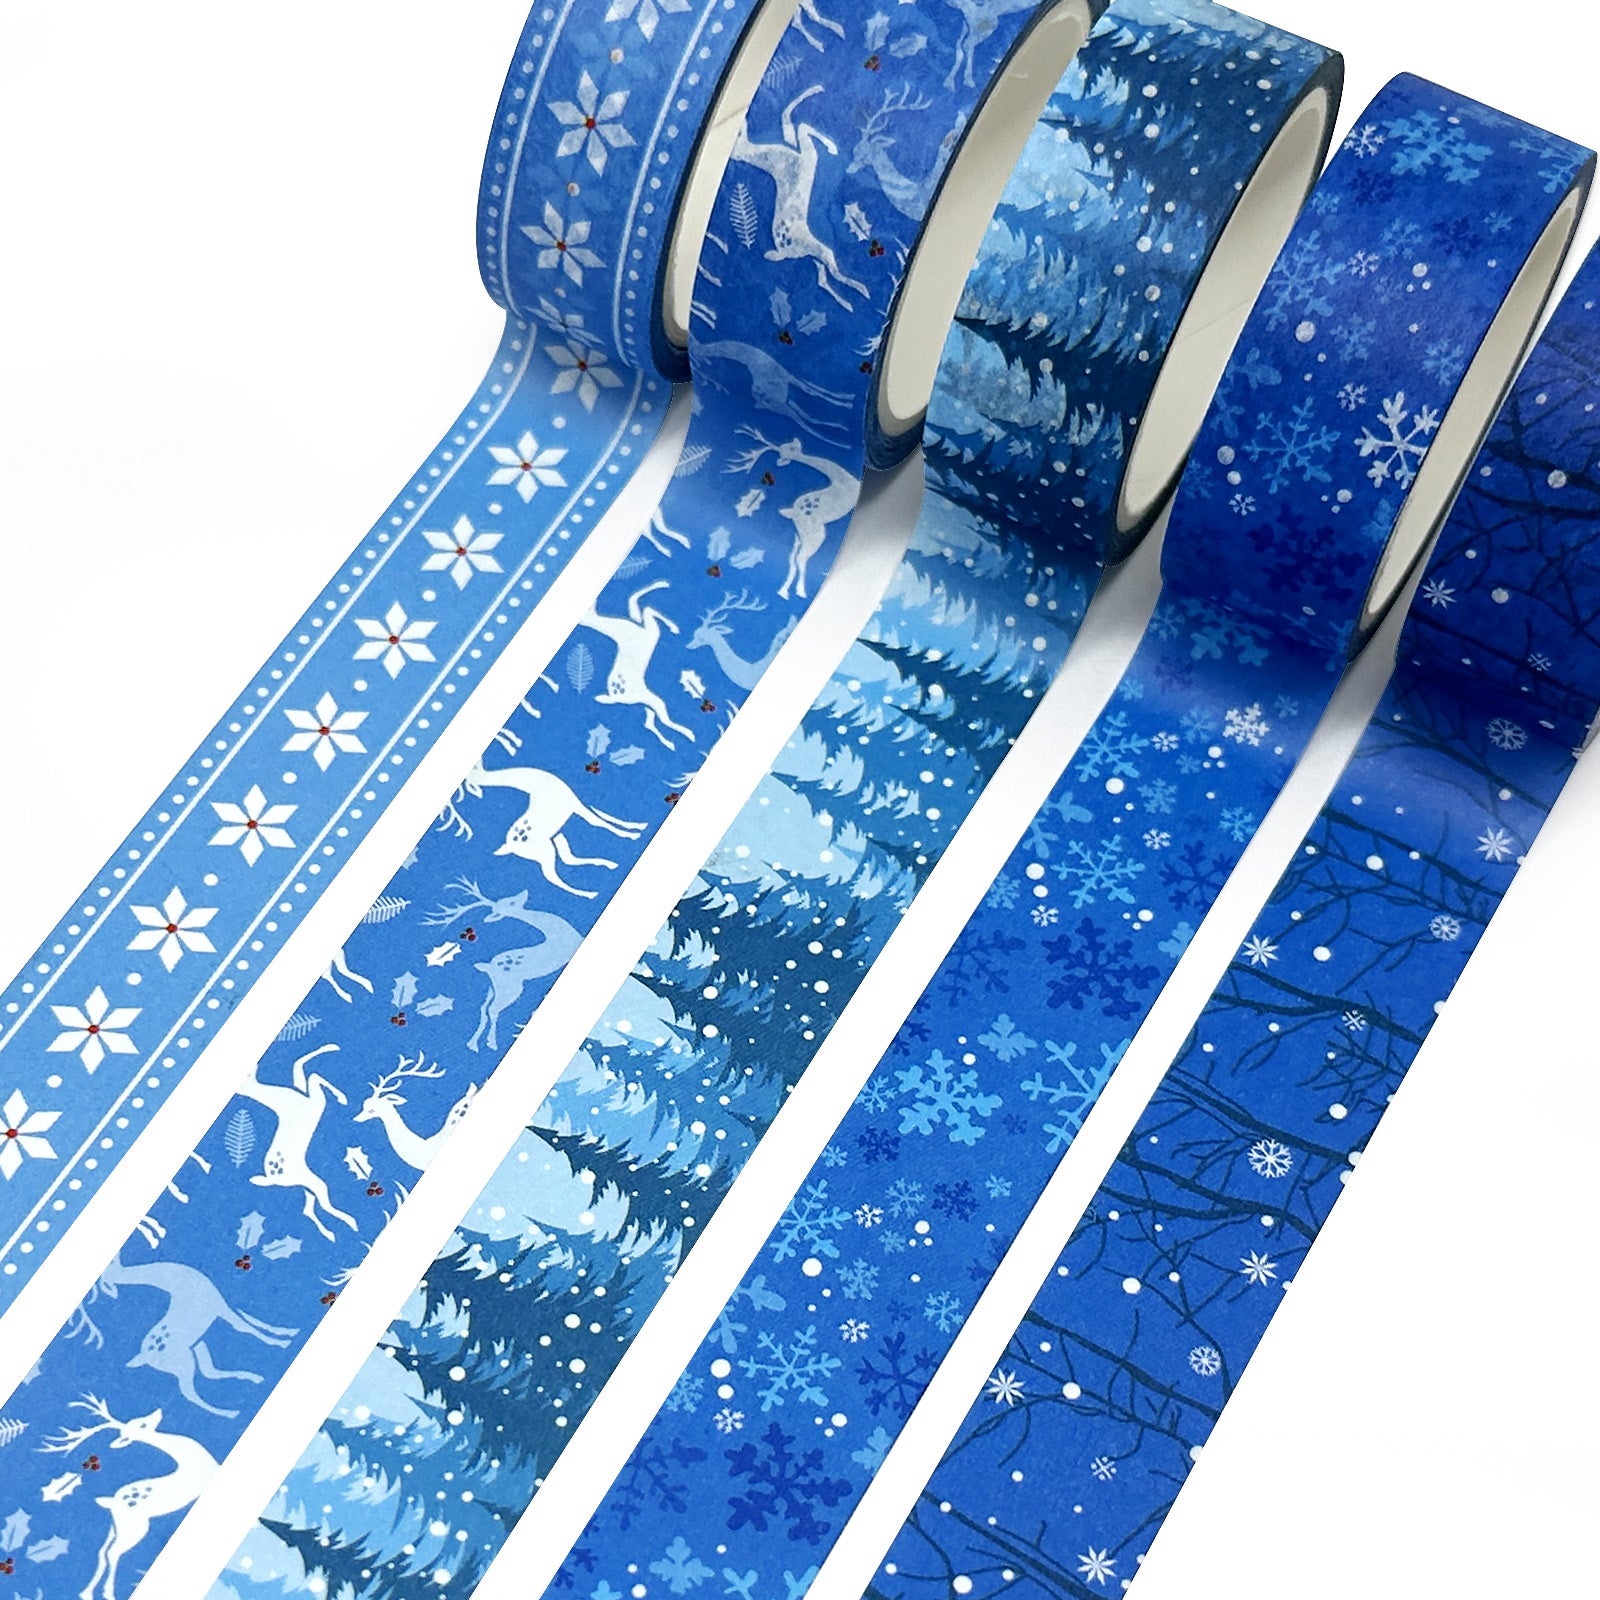 Wrapables Winter Season Washi Set for Arts & Crafts, Scrapbooking, Stationery, Diary 10pc Blue Winter